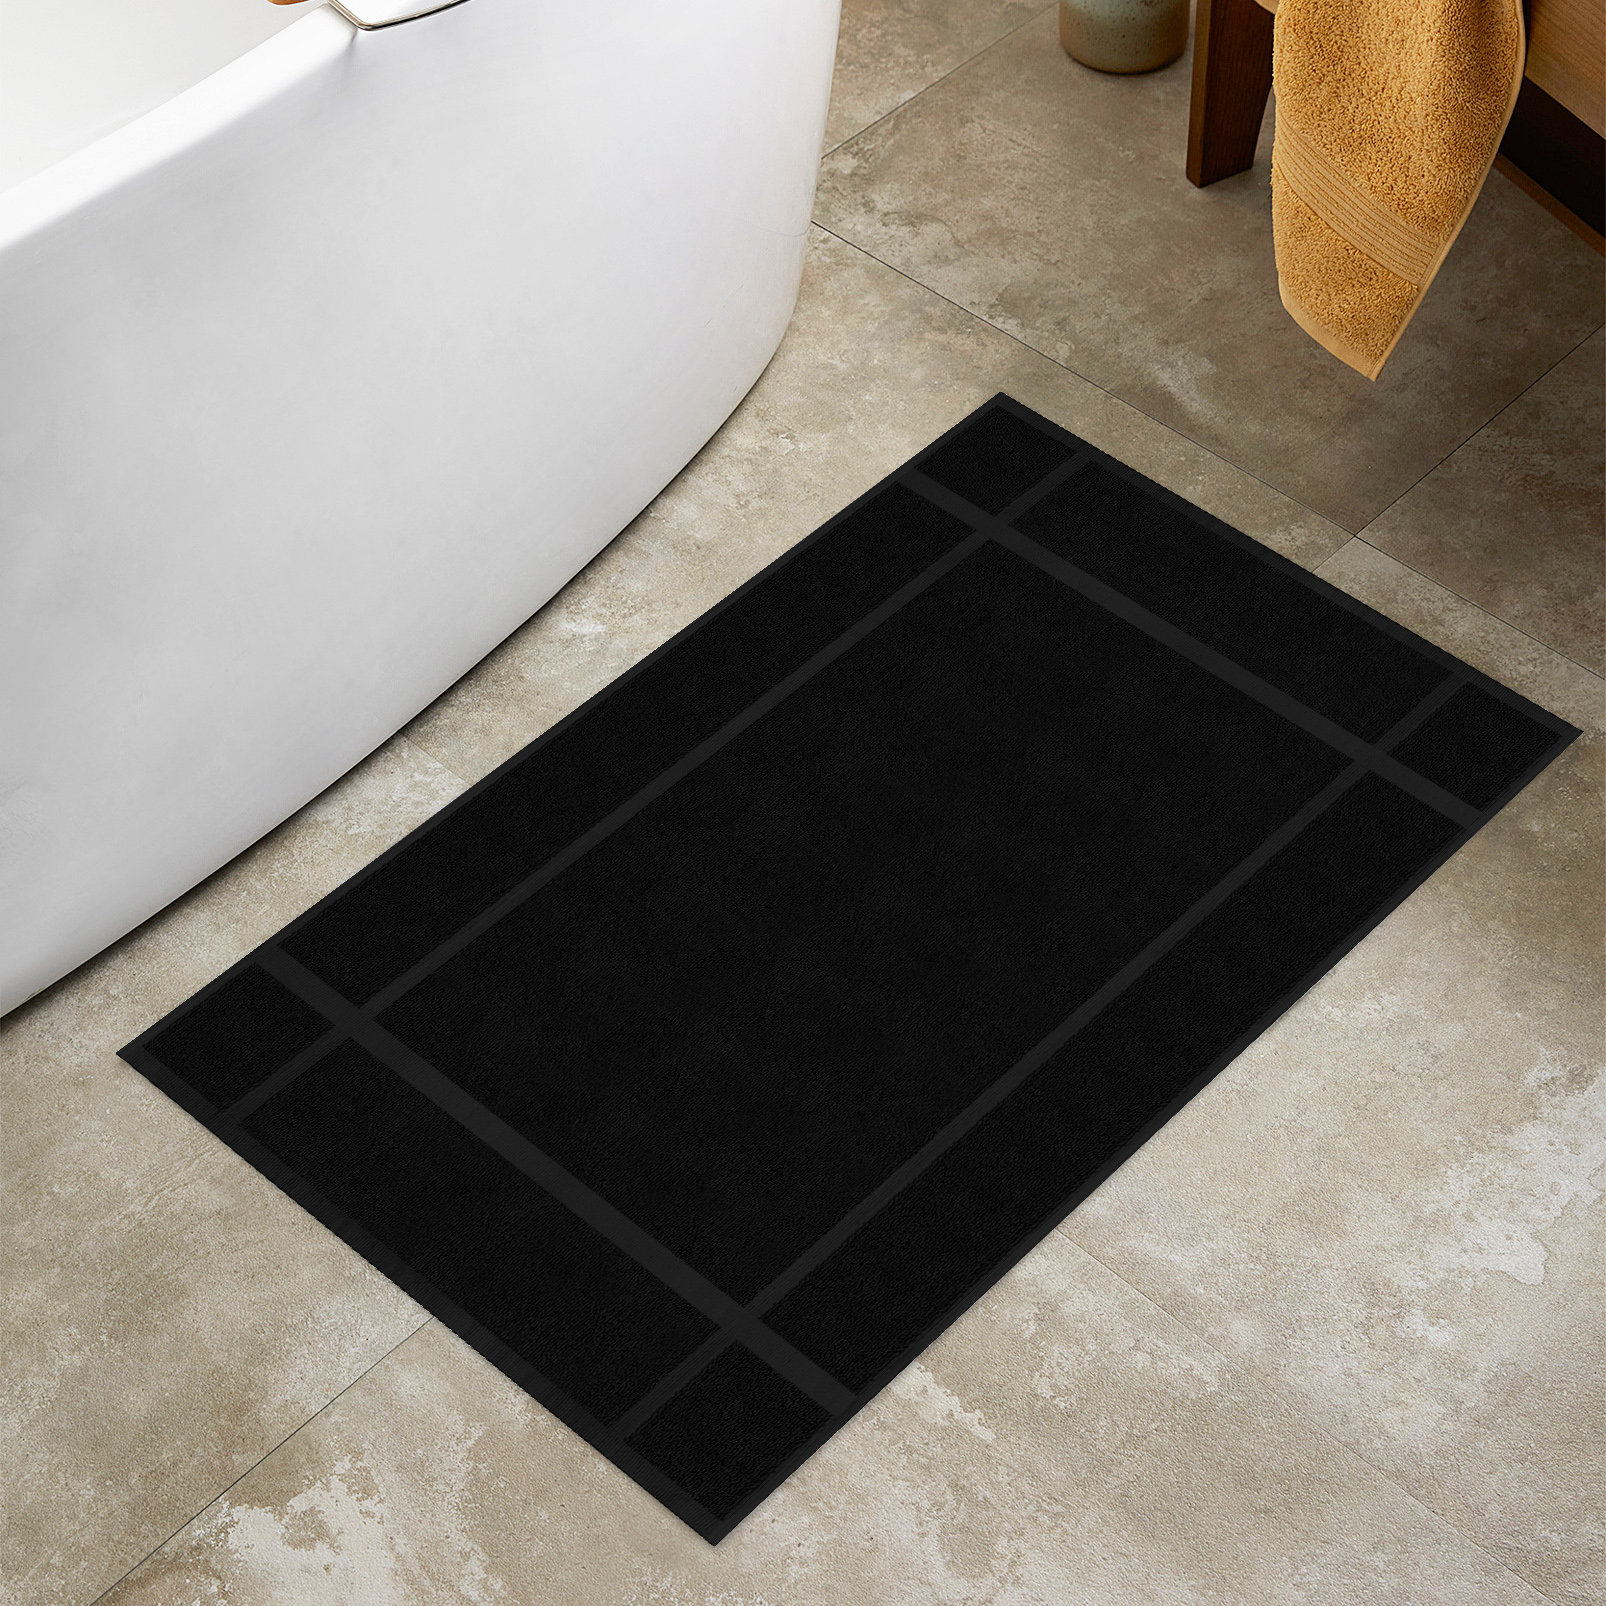 Ultra Plush, Soft, and Absorbent 100% Combed Cotton Pile Bath Rugs